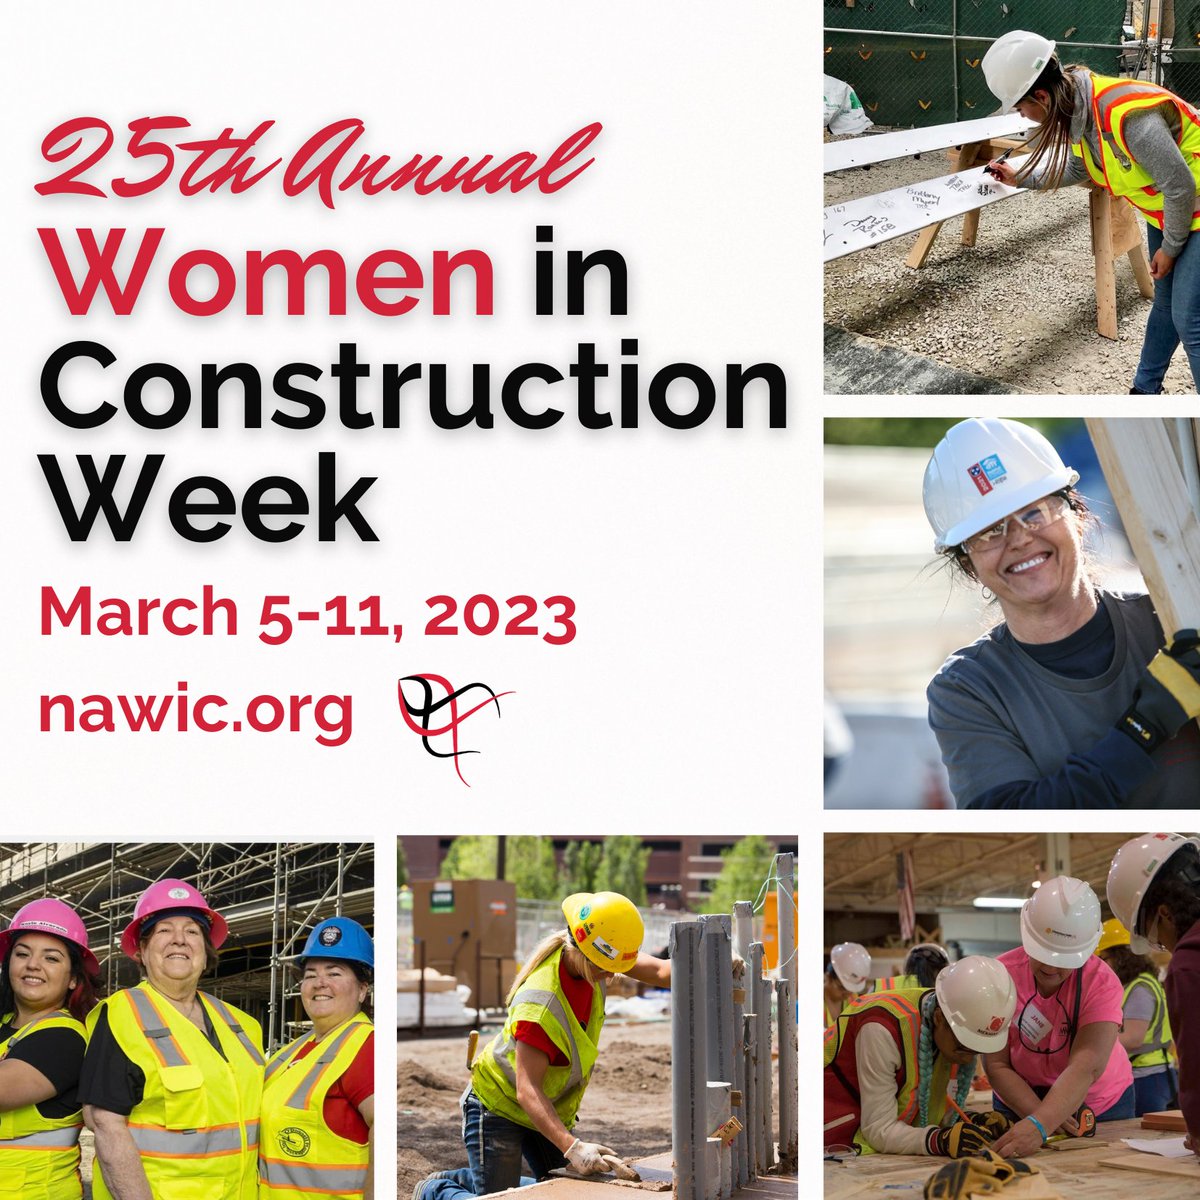 Join us in celebrating Women In Construction Week 2023! We are very thankful for all the inspiring women and their contributions to construction! To every woman breaking barriers in the construction industry, we celebrate you! 👏

#skilledtrades #WICW #WomeninConstruction